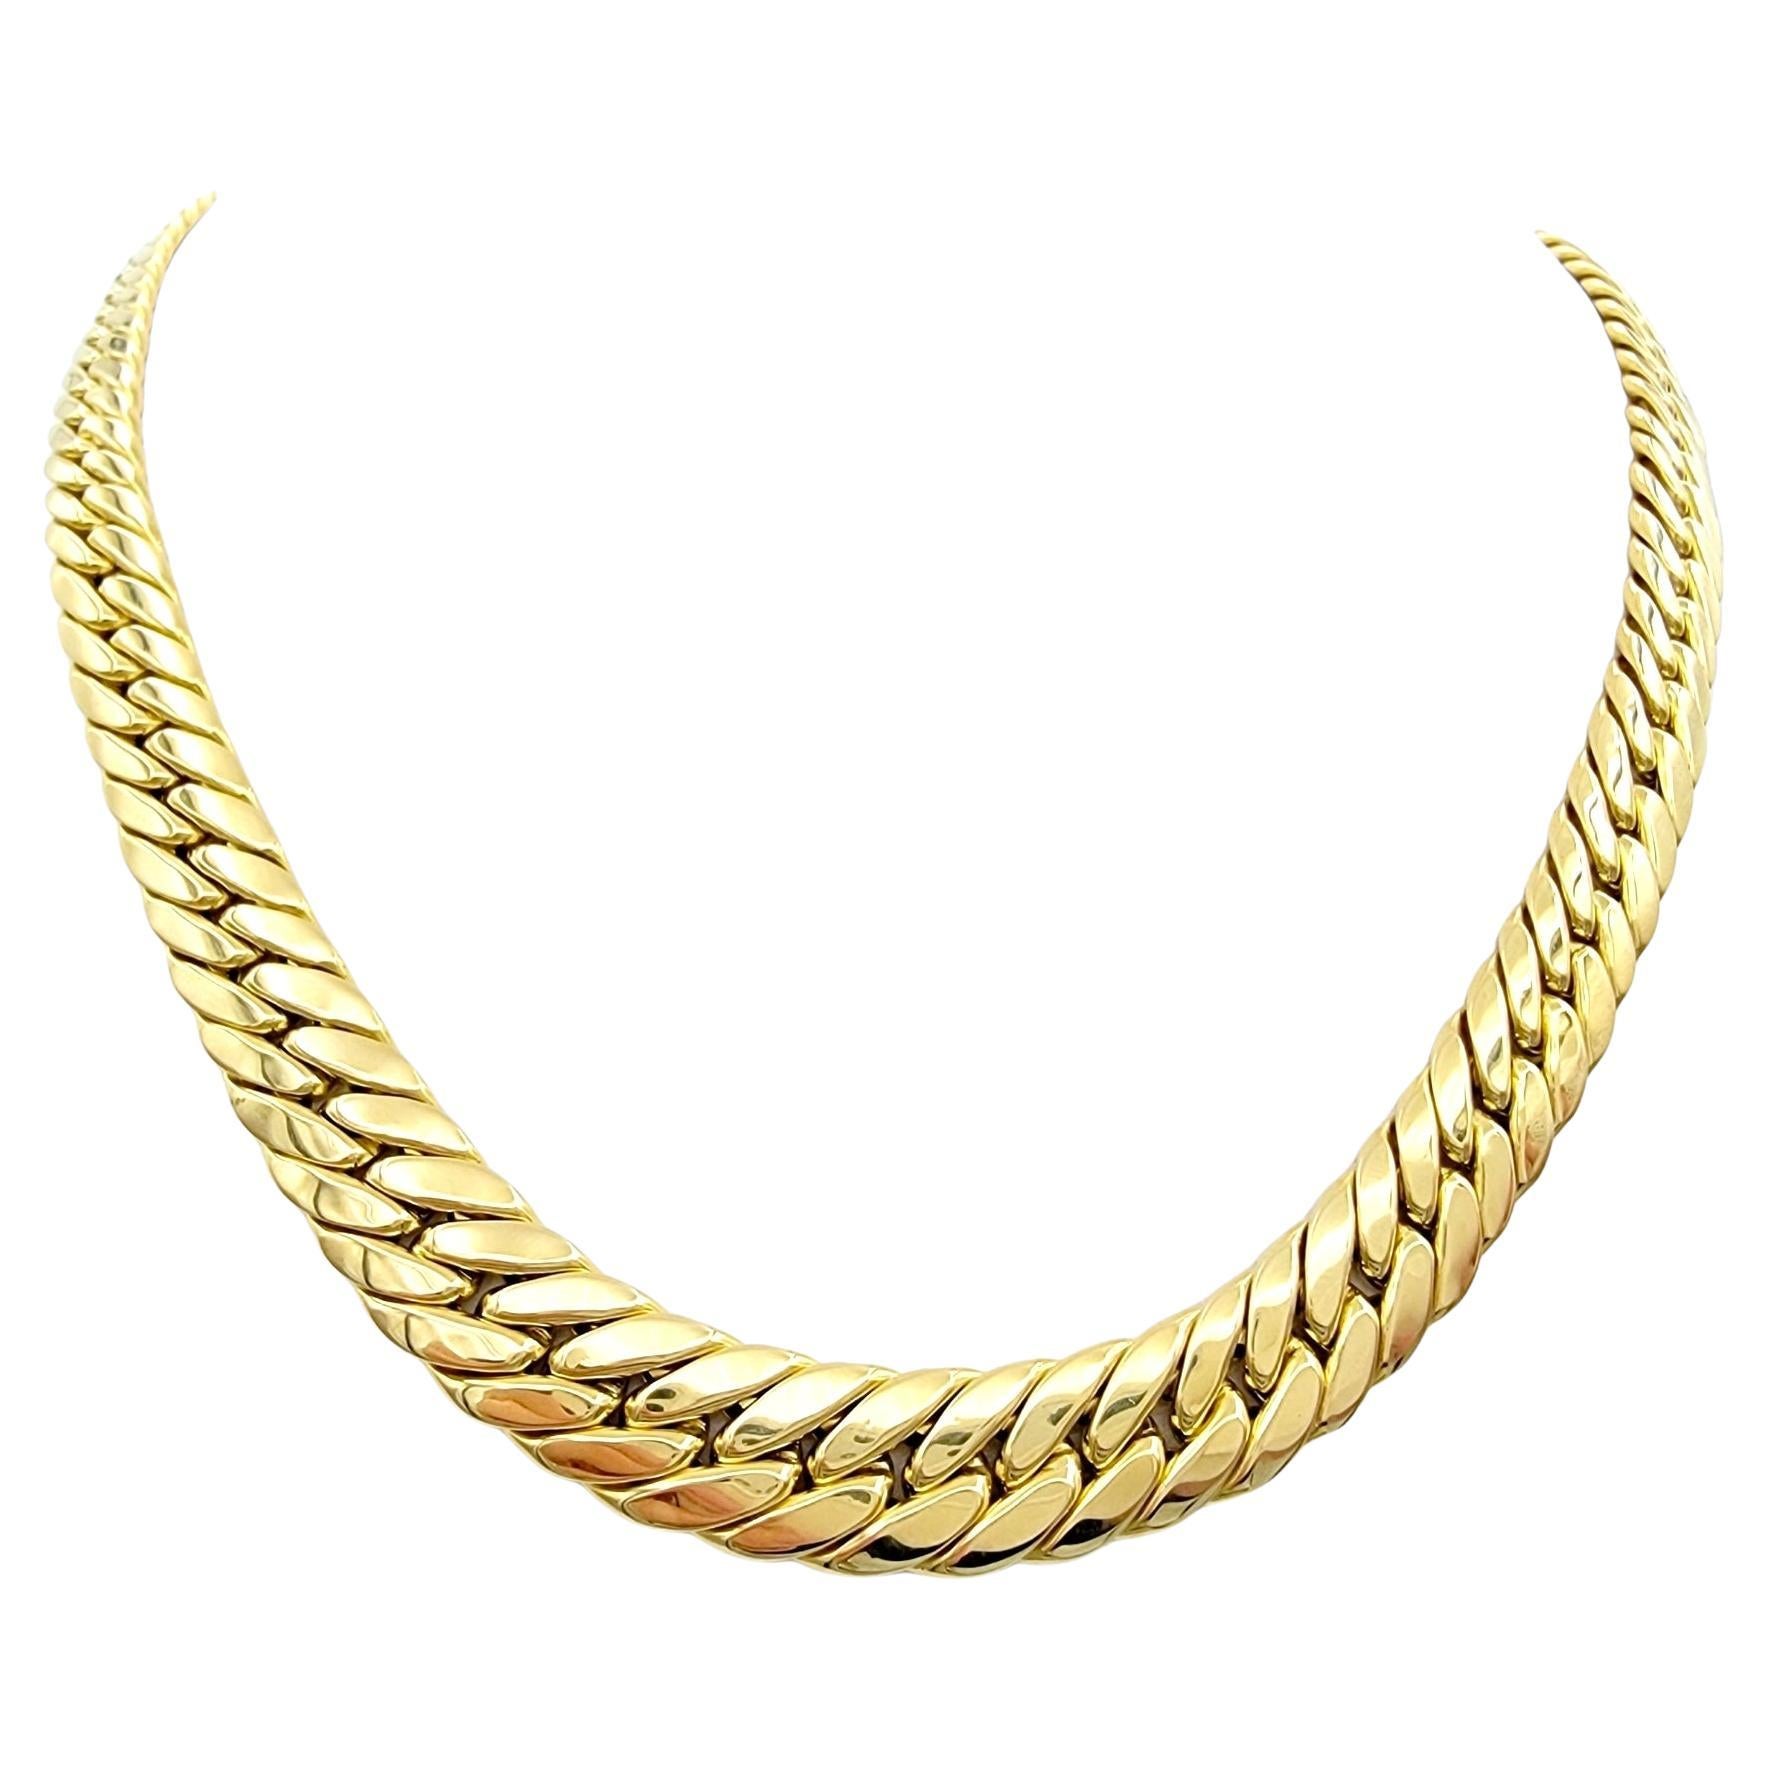 Chunky Graduated Curb Link Chain Necklace in Polished 18 Karat Yellow Gold